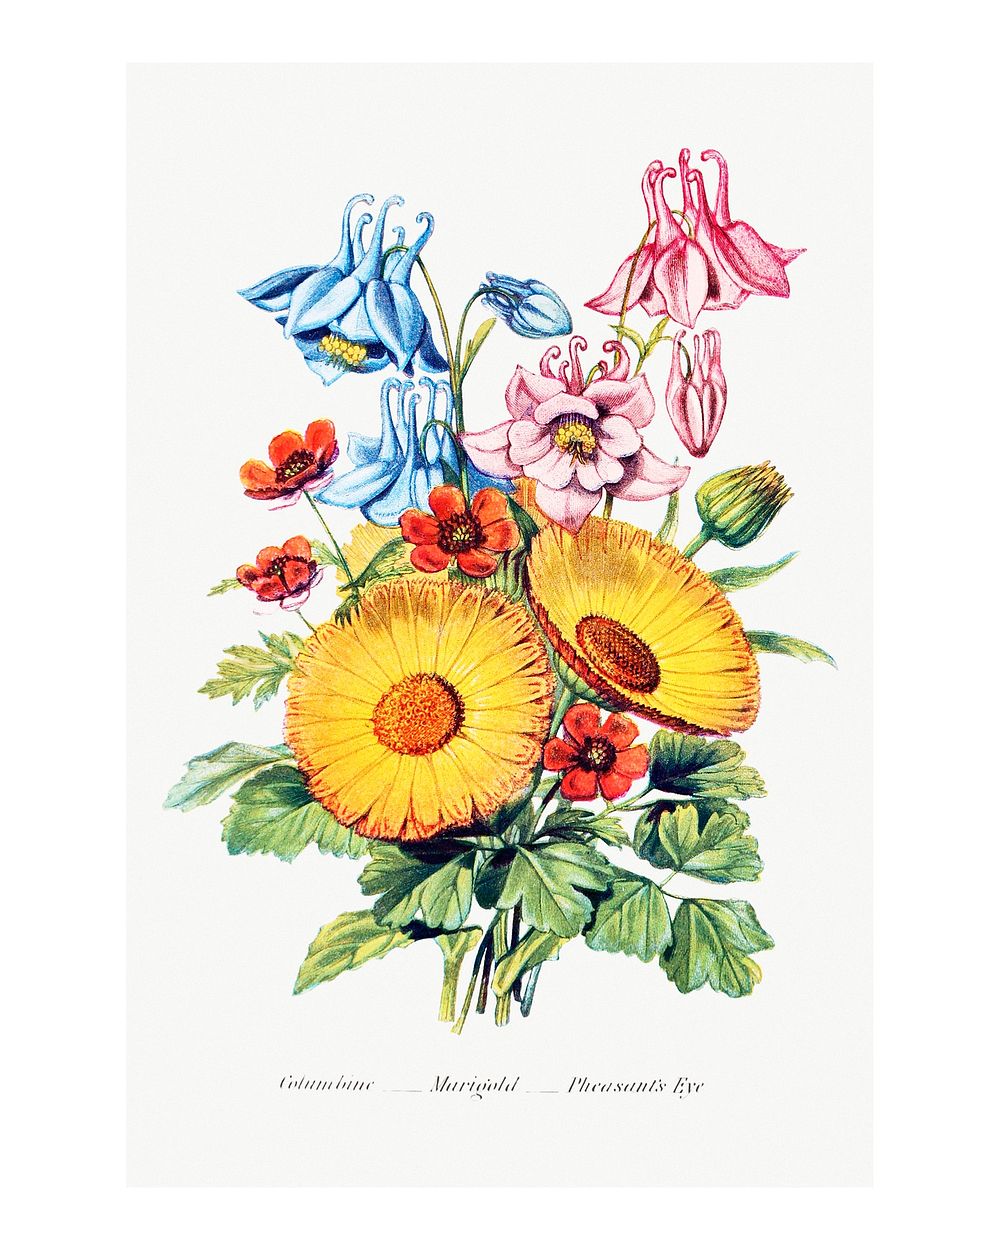 Vintage flower bouquet illustration wall art print and poster design remix from the original artwork.